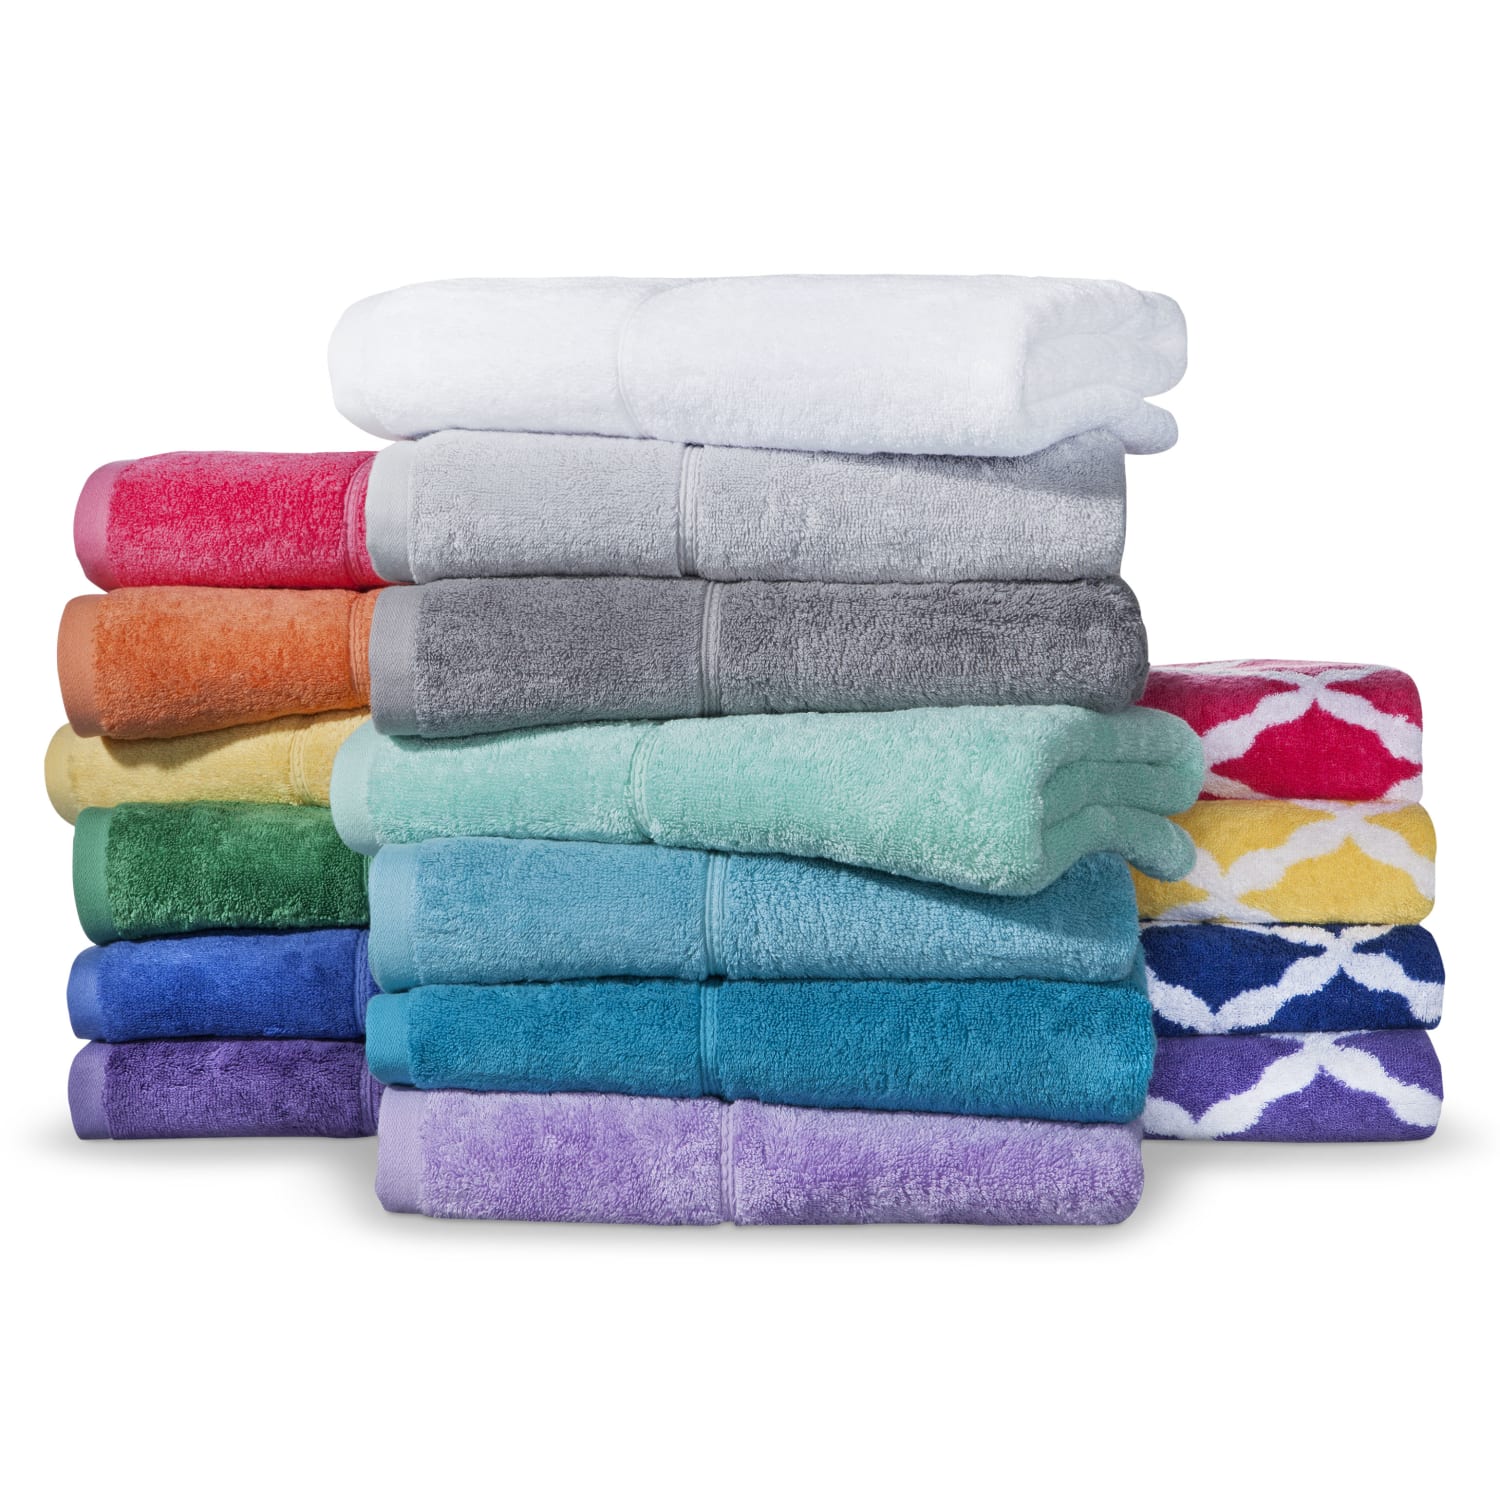 5 best bath towels that are great for college students